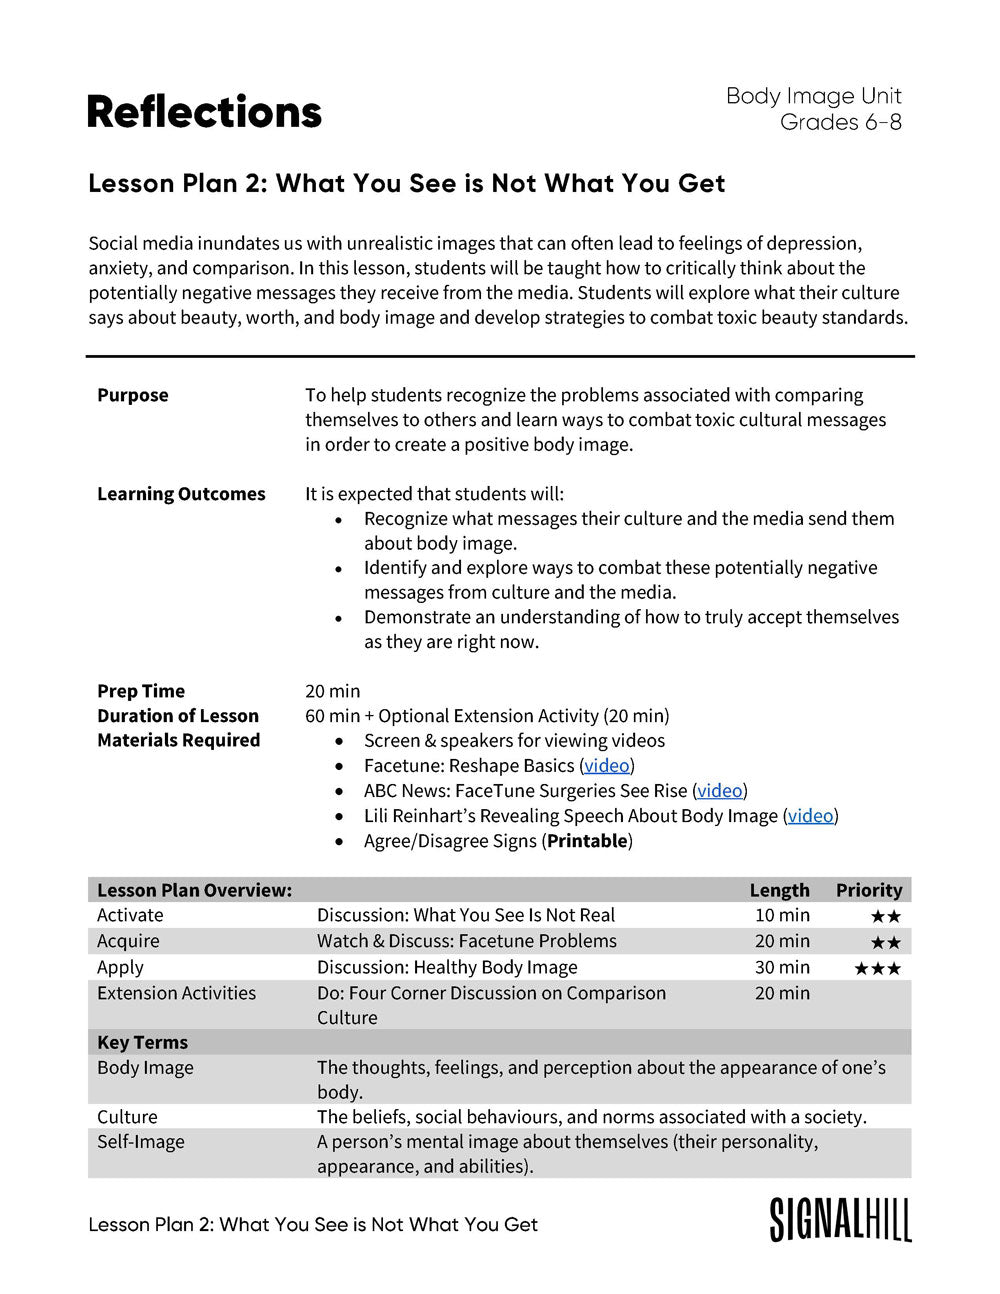 Lesson Plan 2: What You See is Not What You Get